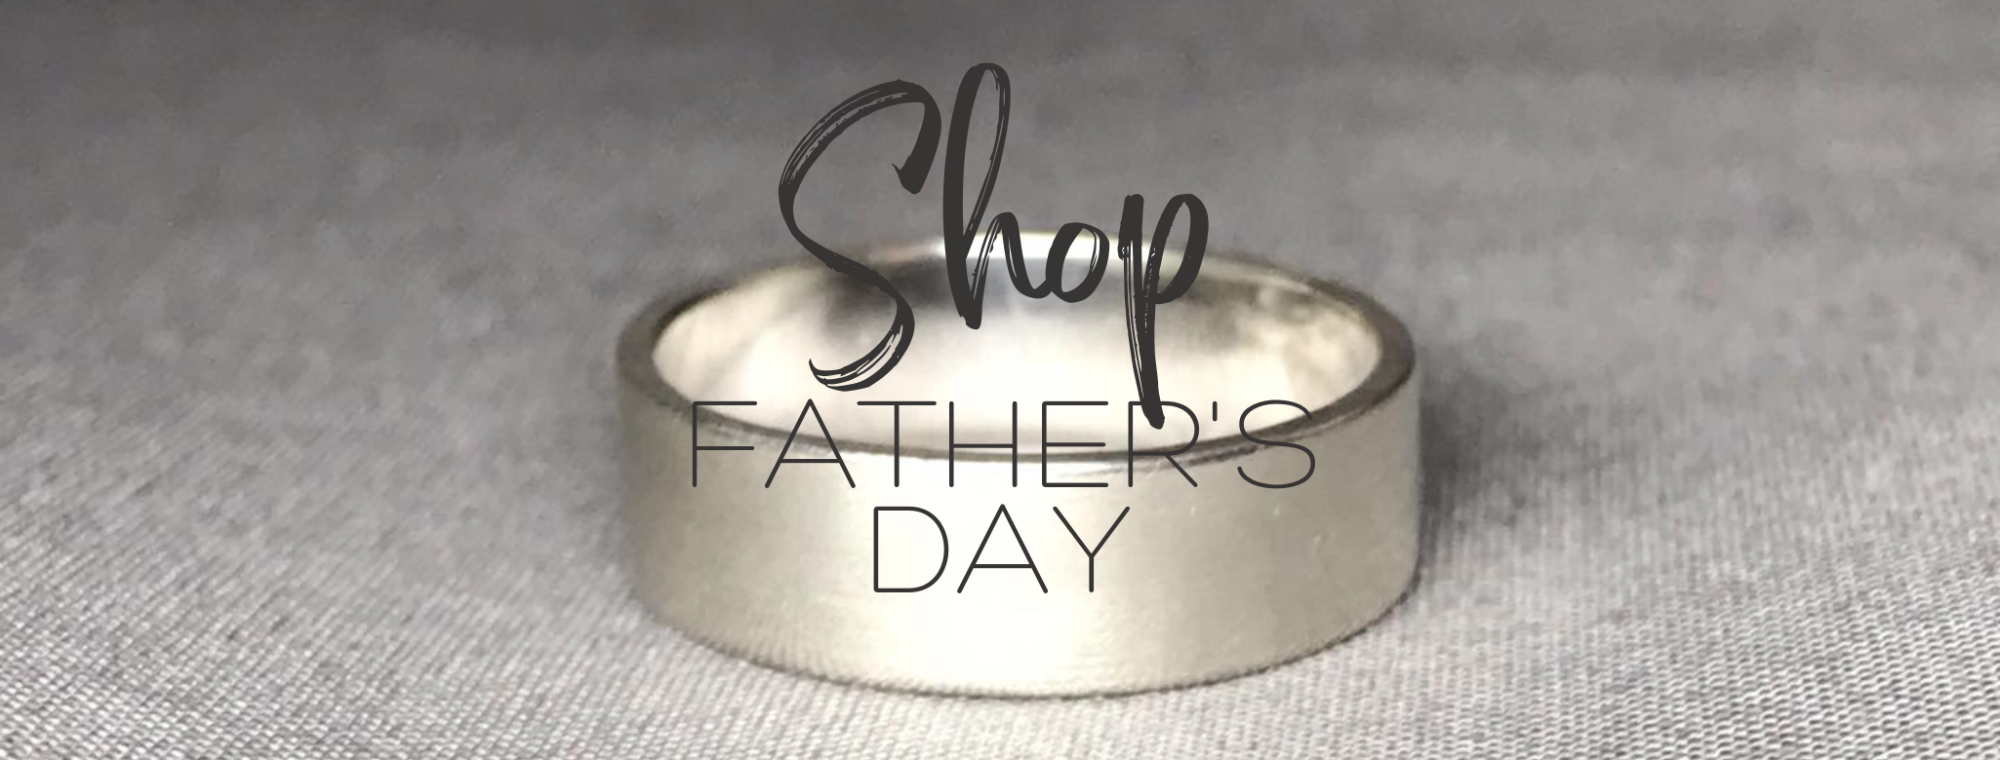 Shop Fathers Day.png